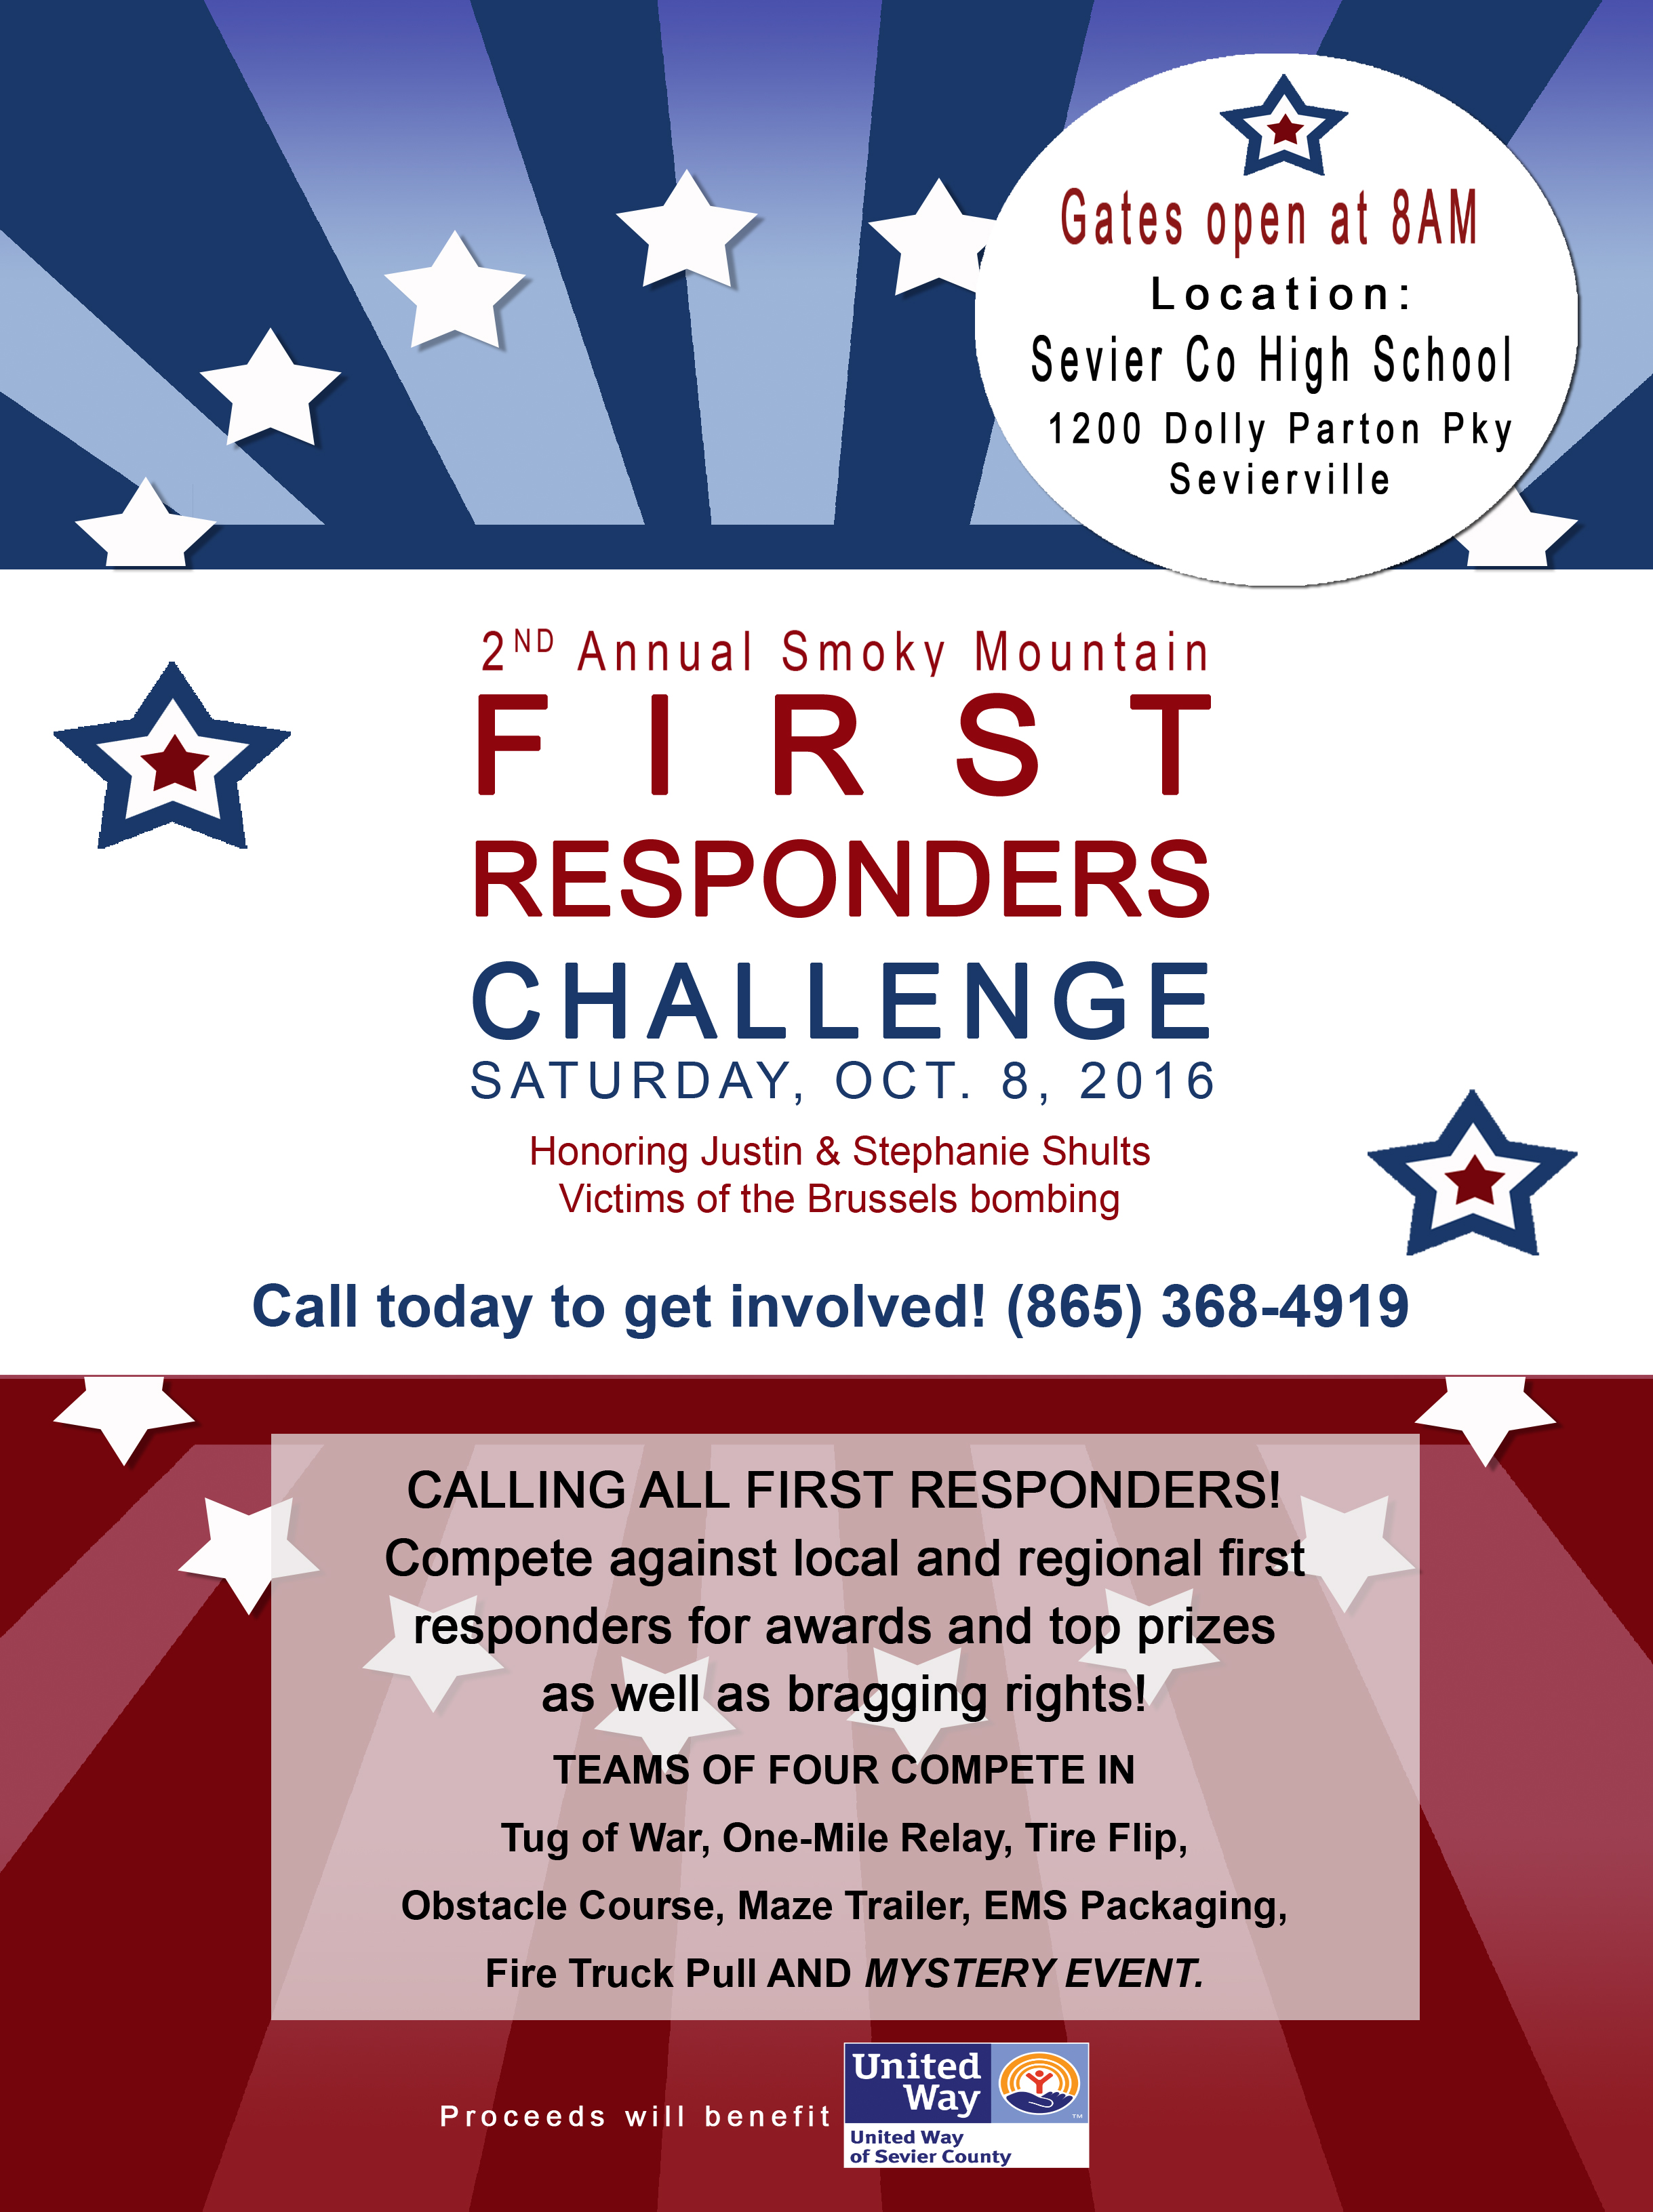 2nd Annual Smoky Mountain First Responders Challenge